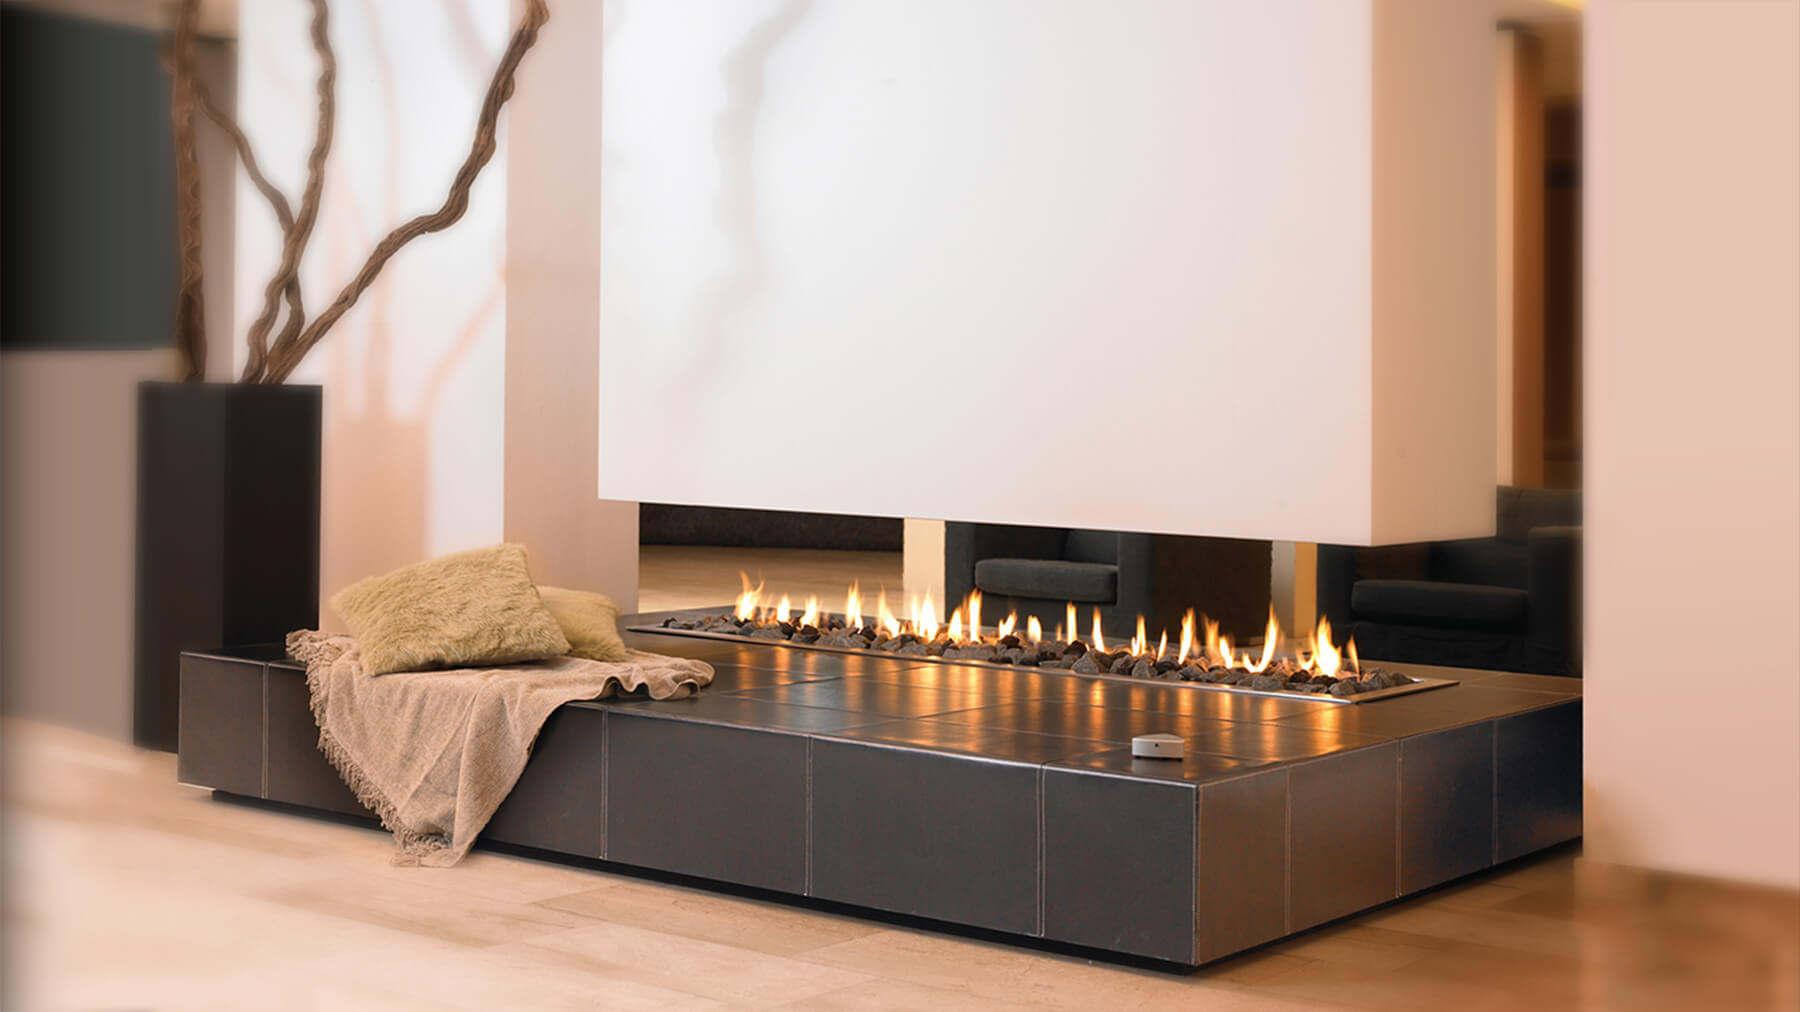 Surprising Facts about Gas Designer Fireplaces